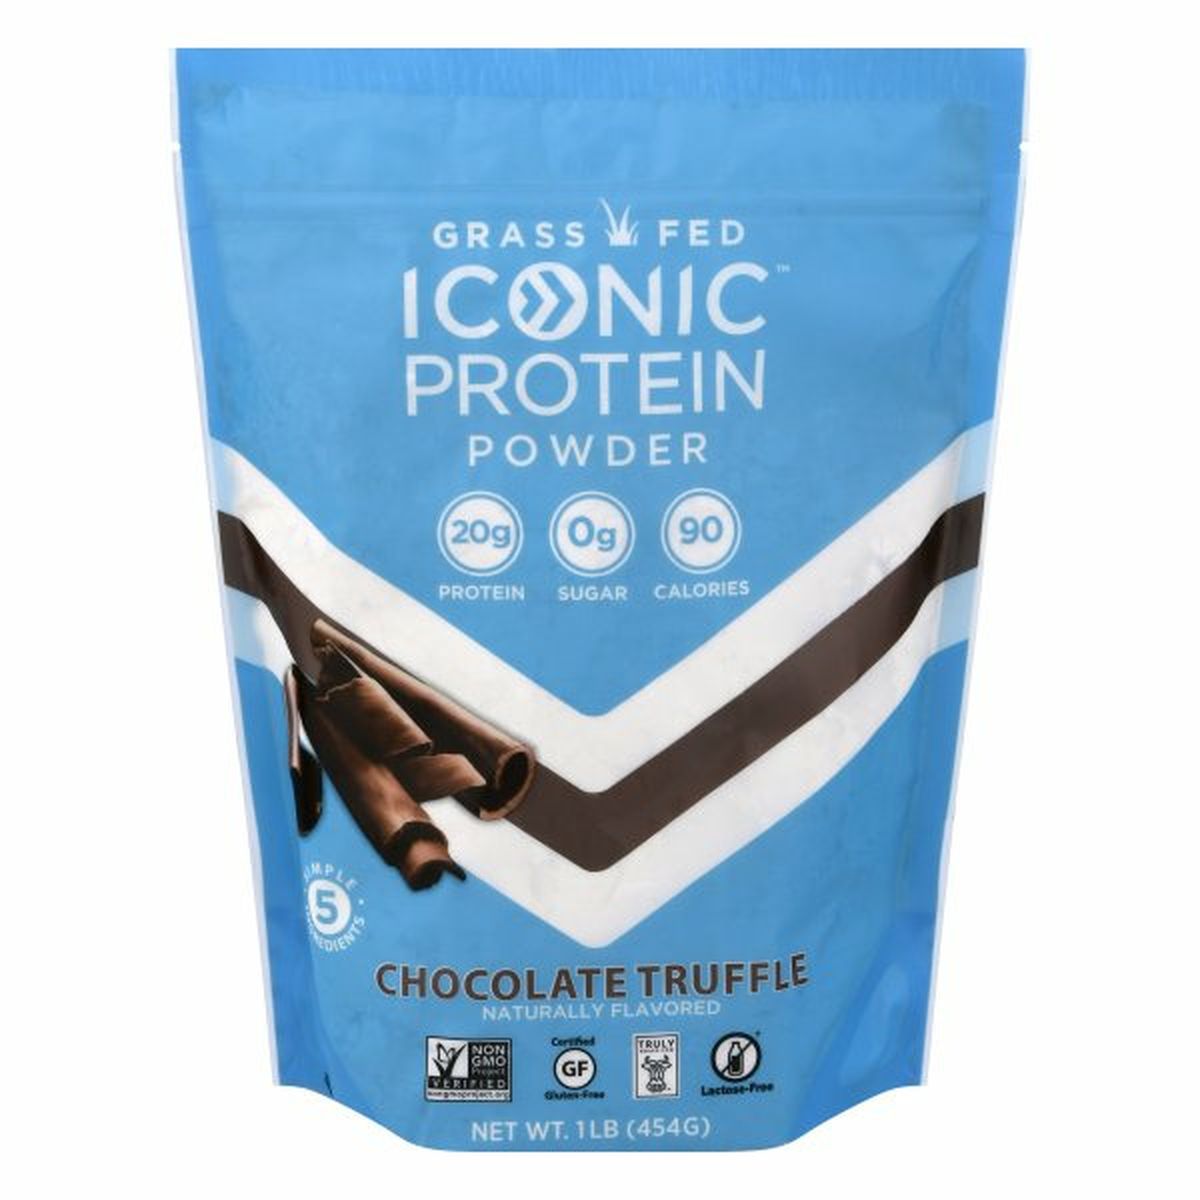 Calories in Iconic Protein Powder, Chocolate Truffle